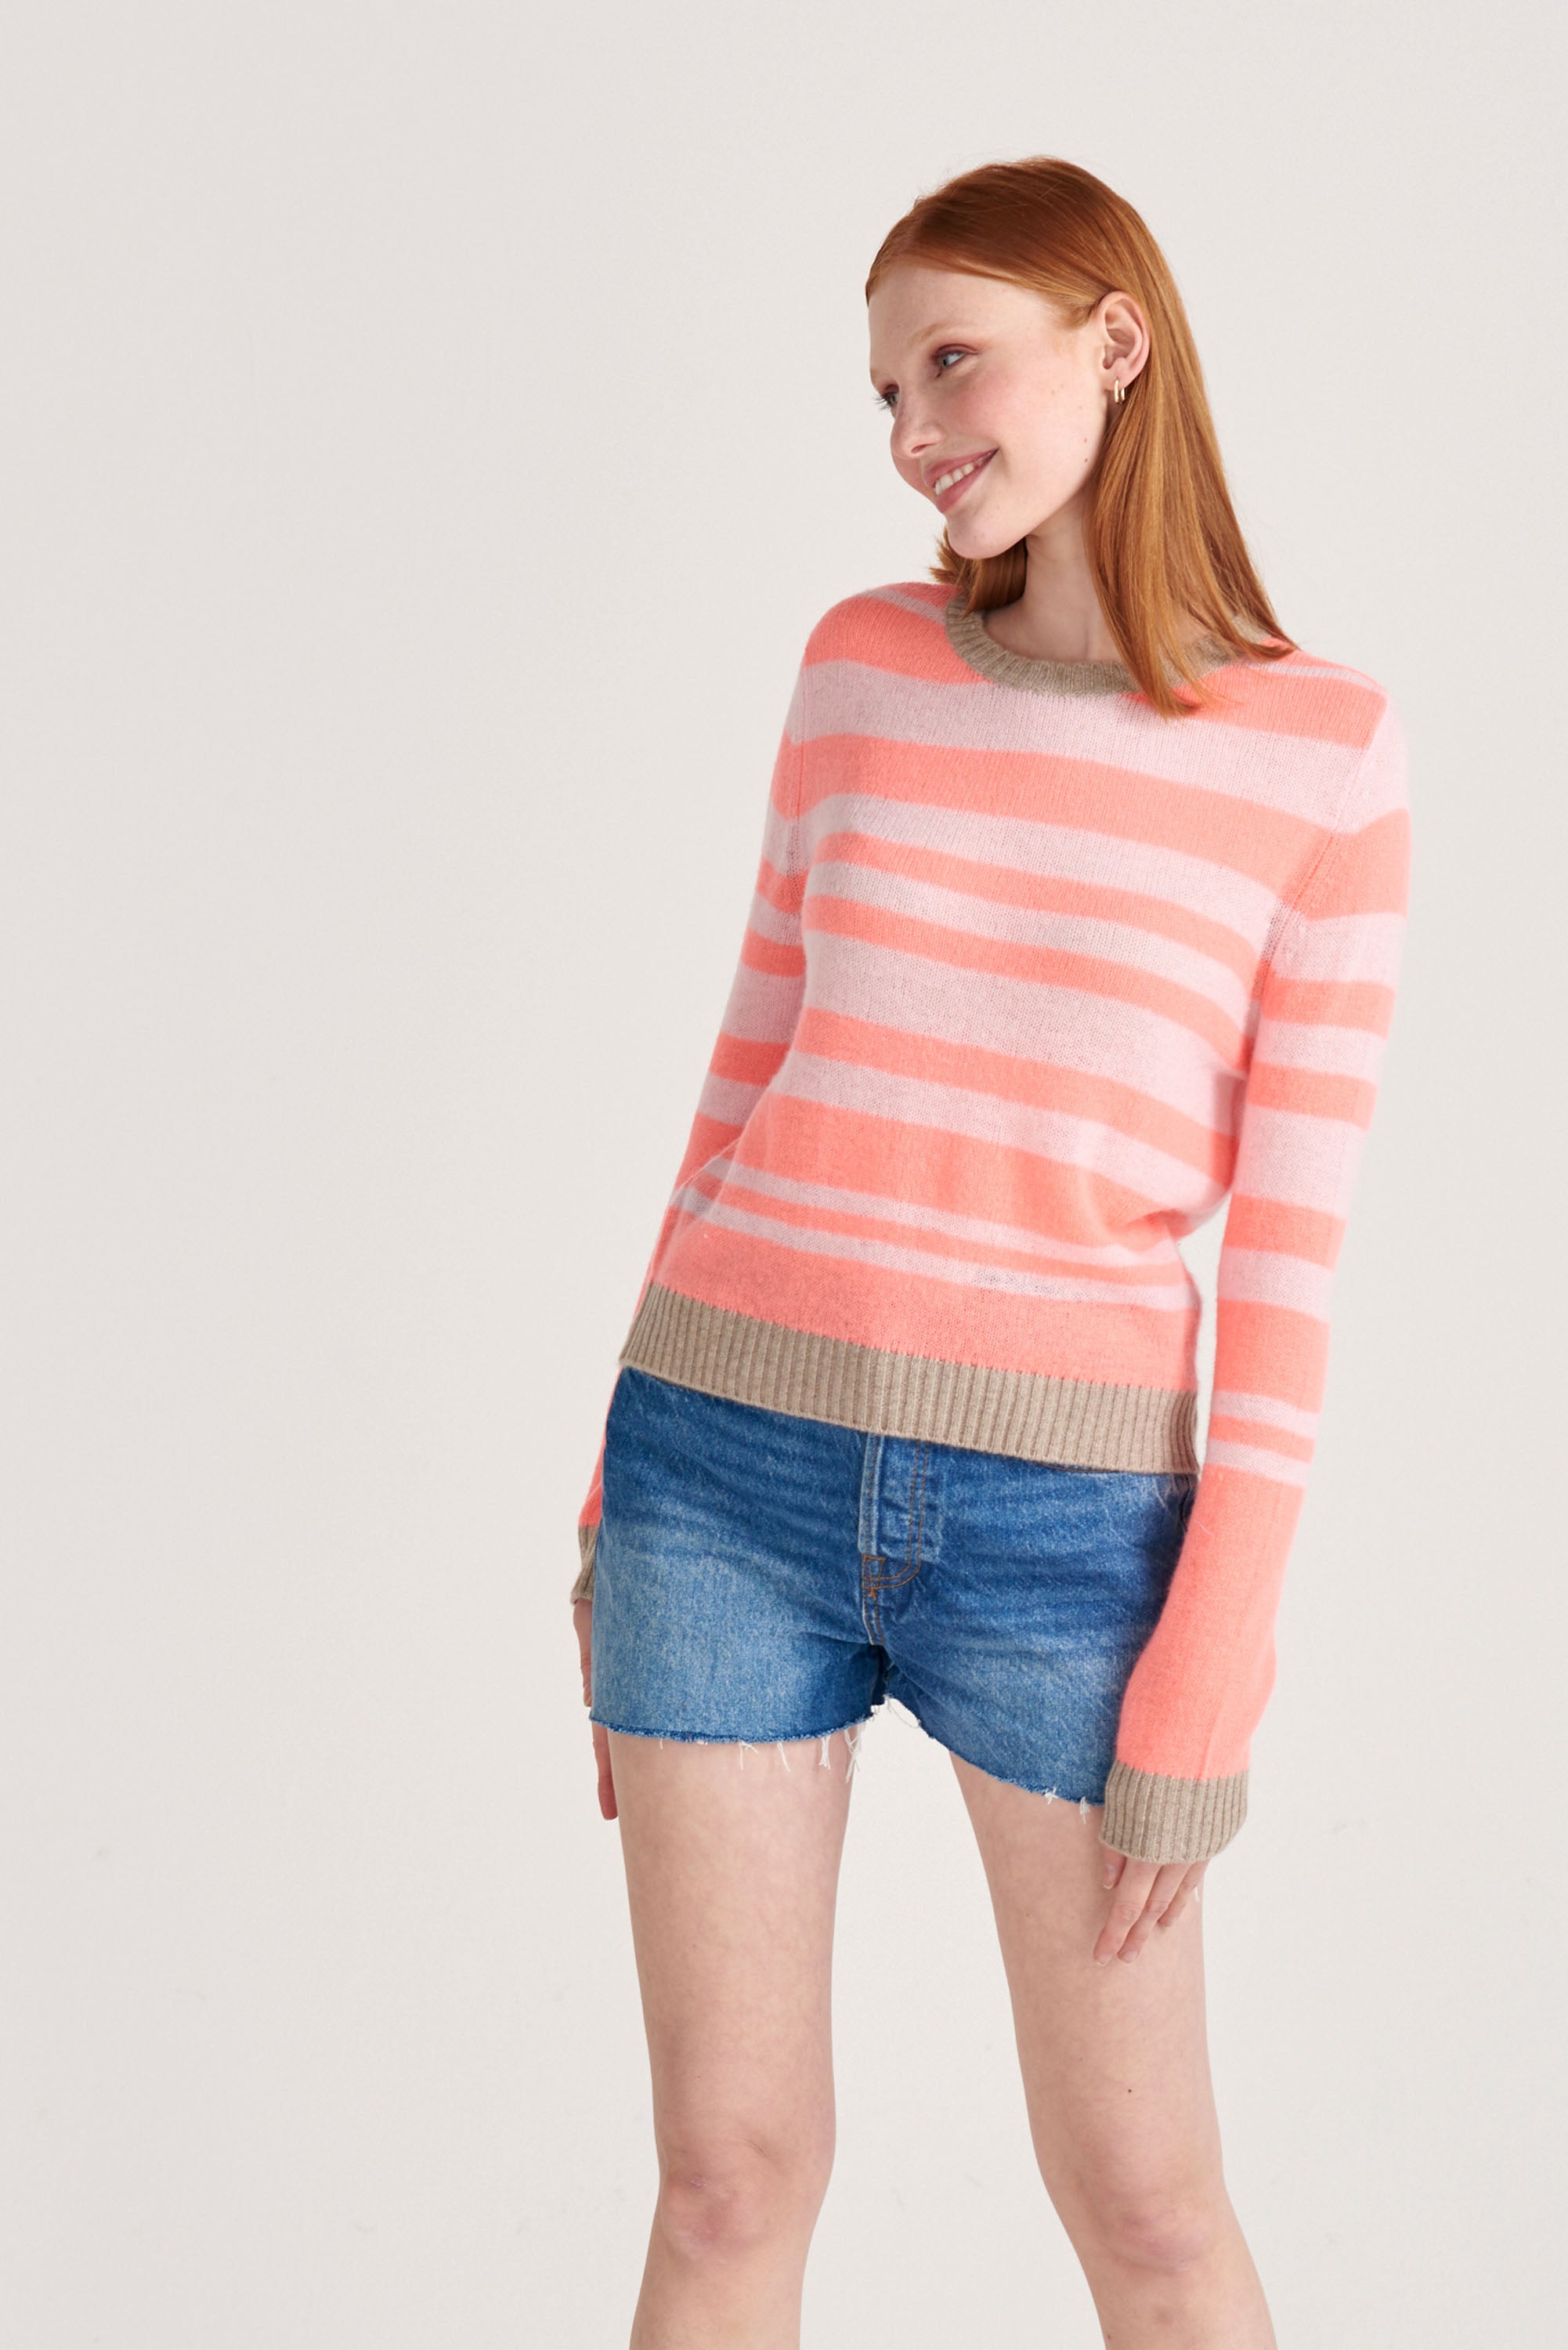 Red haired female model wearing Jumper1234 pale pink and neon coral stripe crew neck cashmere jumper with organic light brown contrast trims